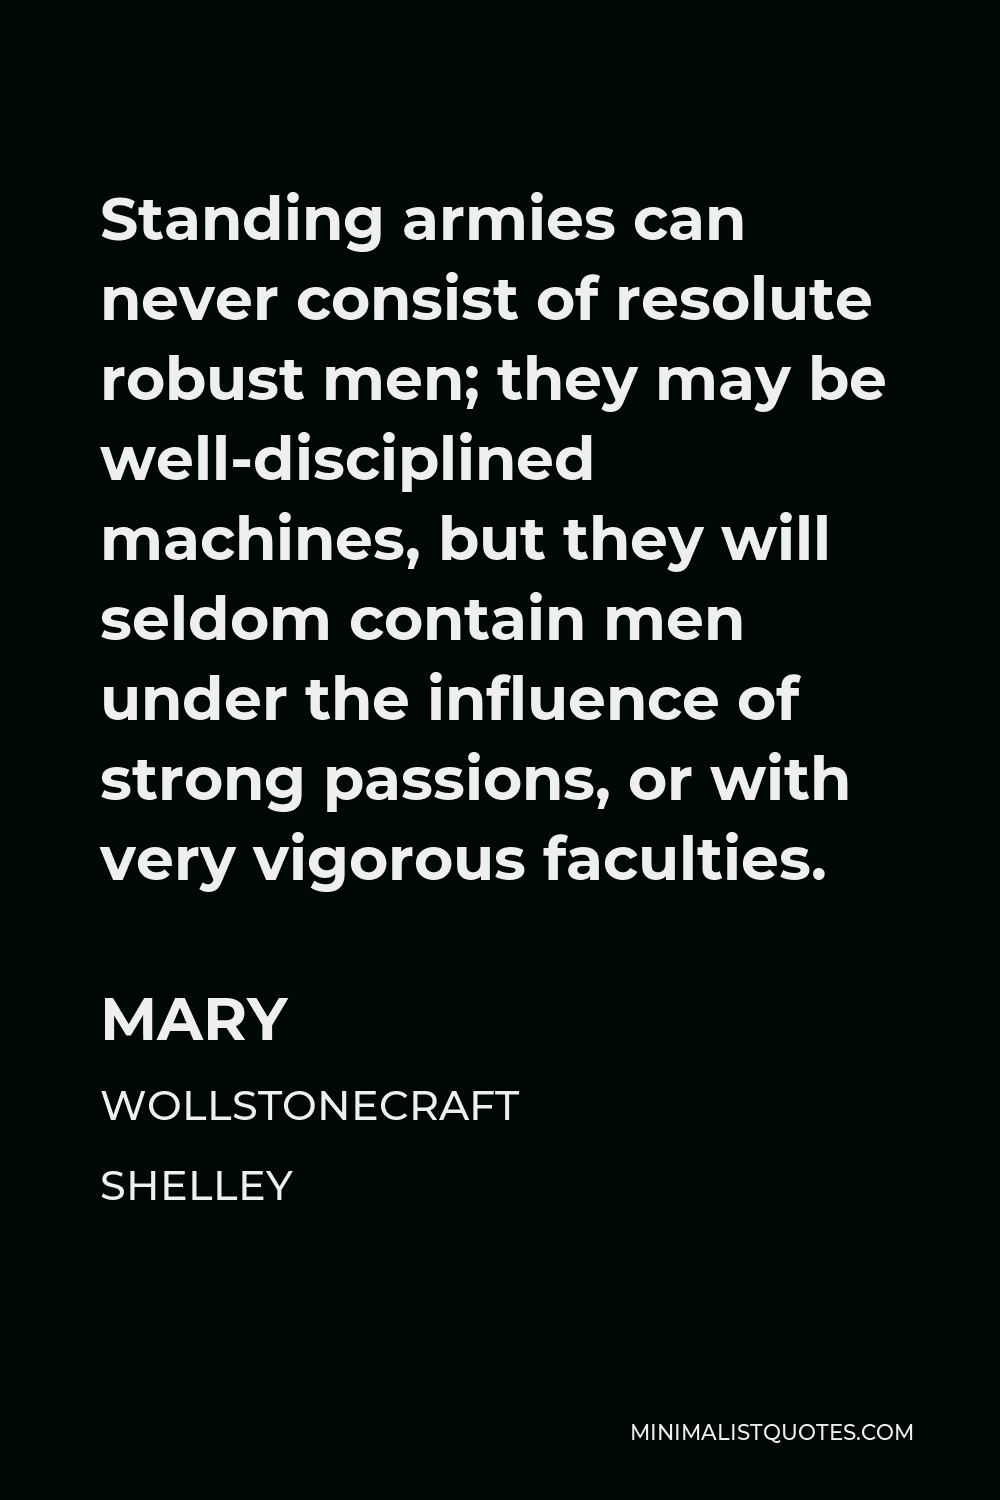 Mary Wollstonecraft Shelley Quote - Standing armies can never consist of resolute robust men; they may be well-disciplined machines, but they will seldom contain men under the influence of strong passions, or with very vigorous faculties.